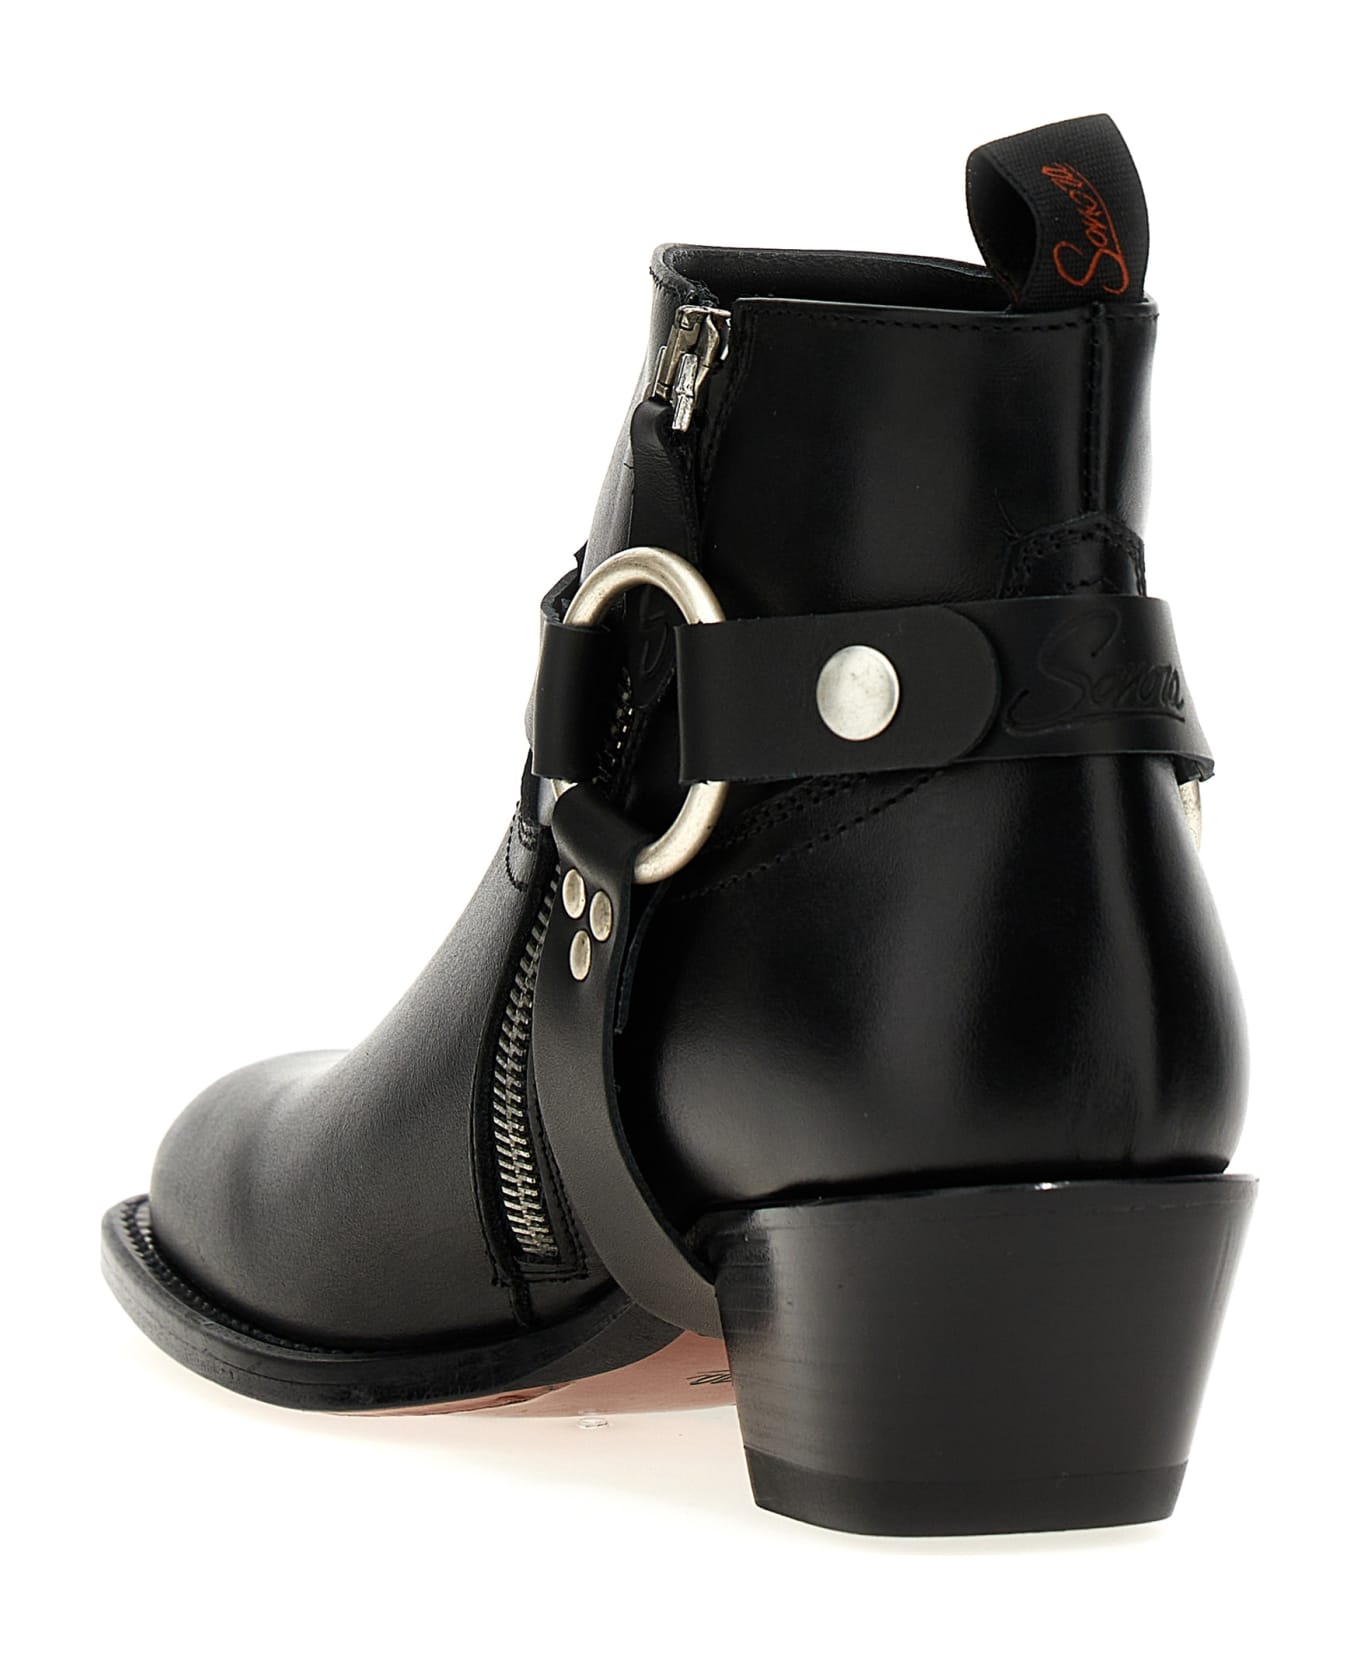 Sonora 'dulce Belt' Ankle Boots - Black   ブーツ